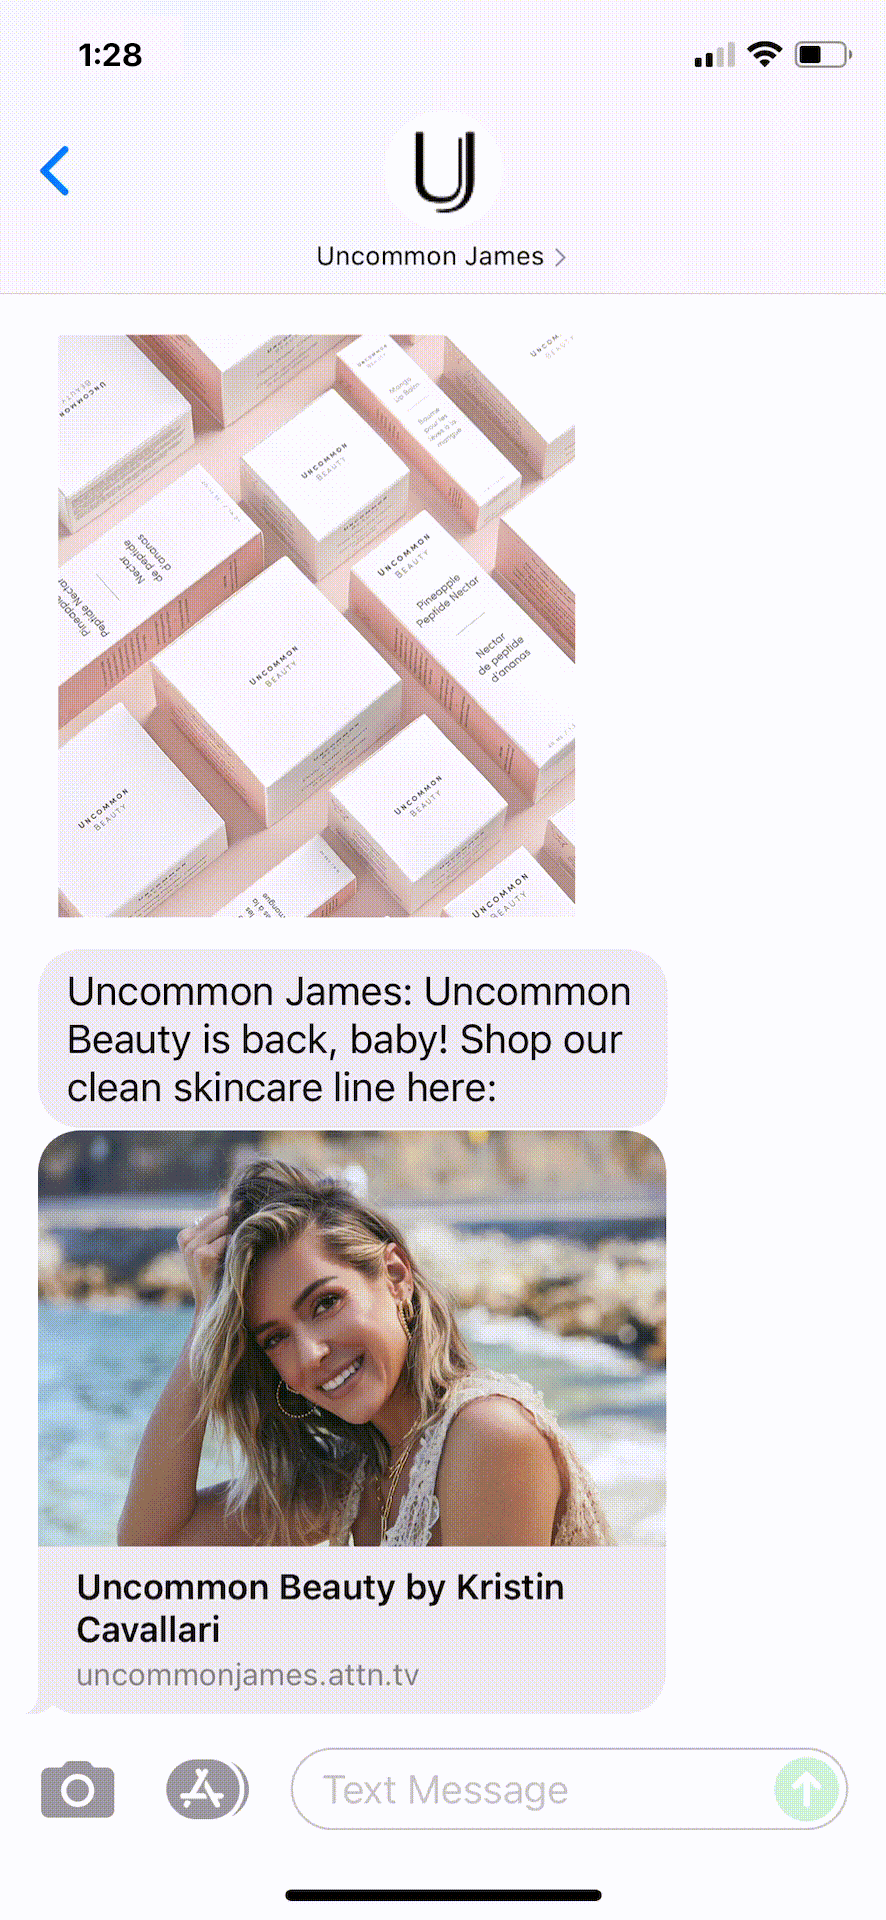 Uncommon-James-Text-Message-Marketing-Example-07.15.2021